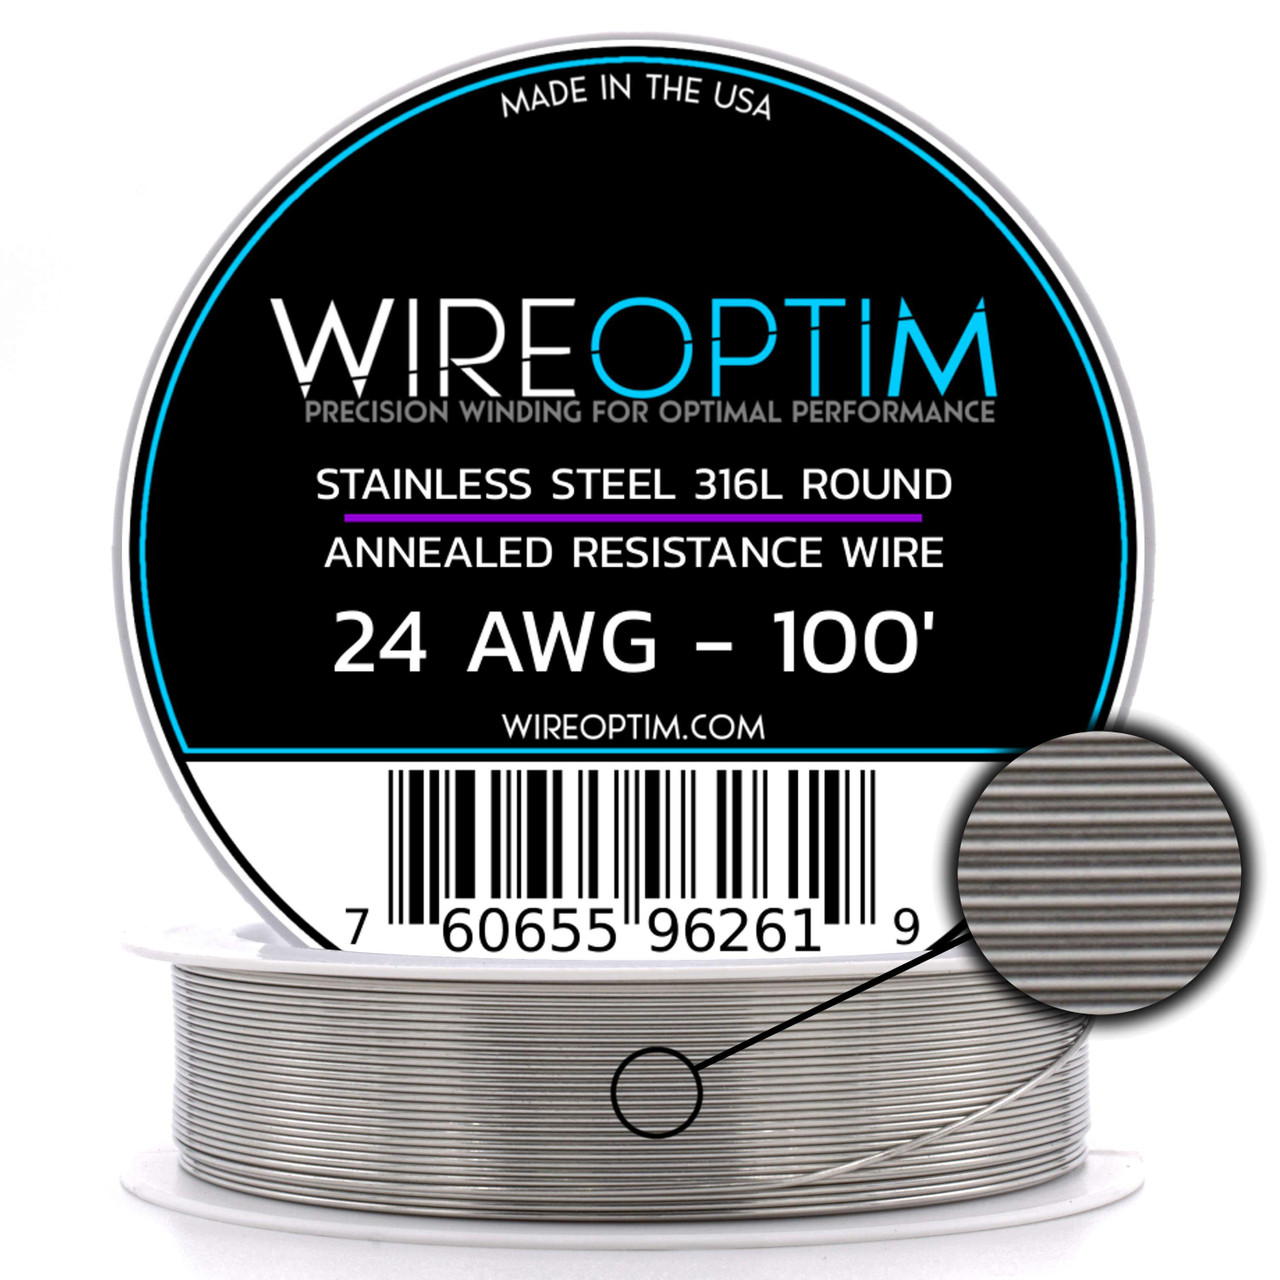 MWS - SS 316L - 100 ft. 28 Gauge AWG Stainless Steel Resistance